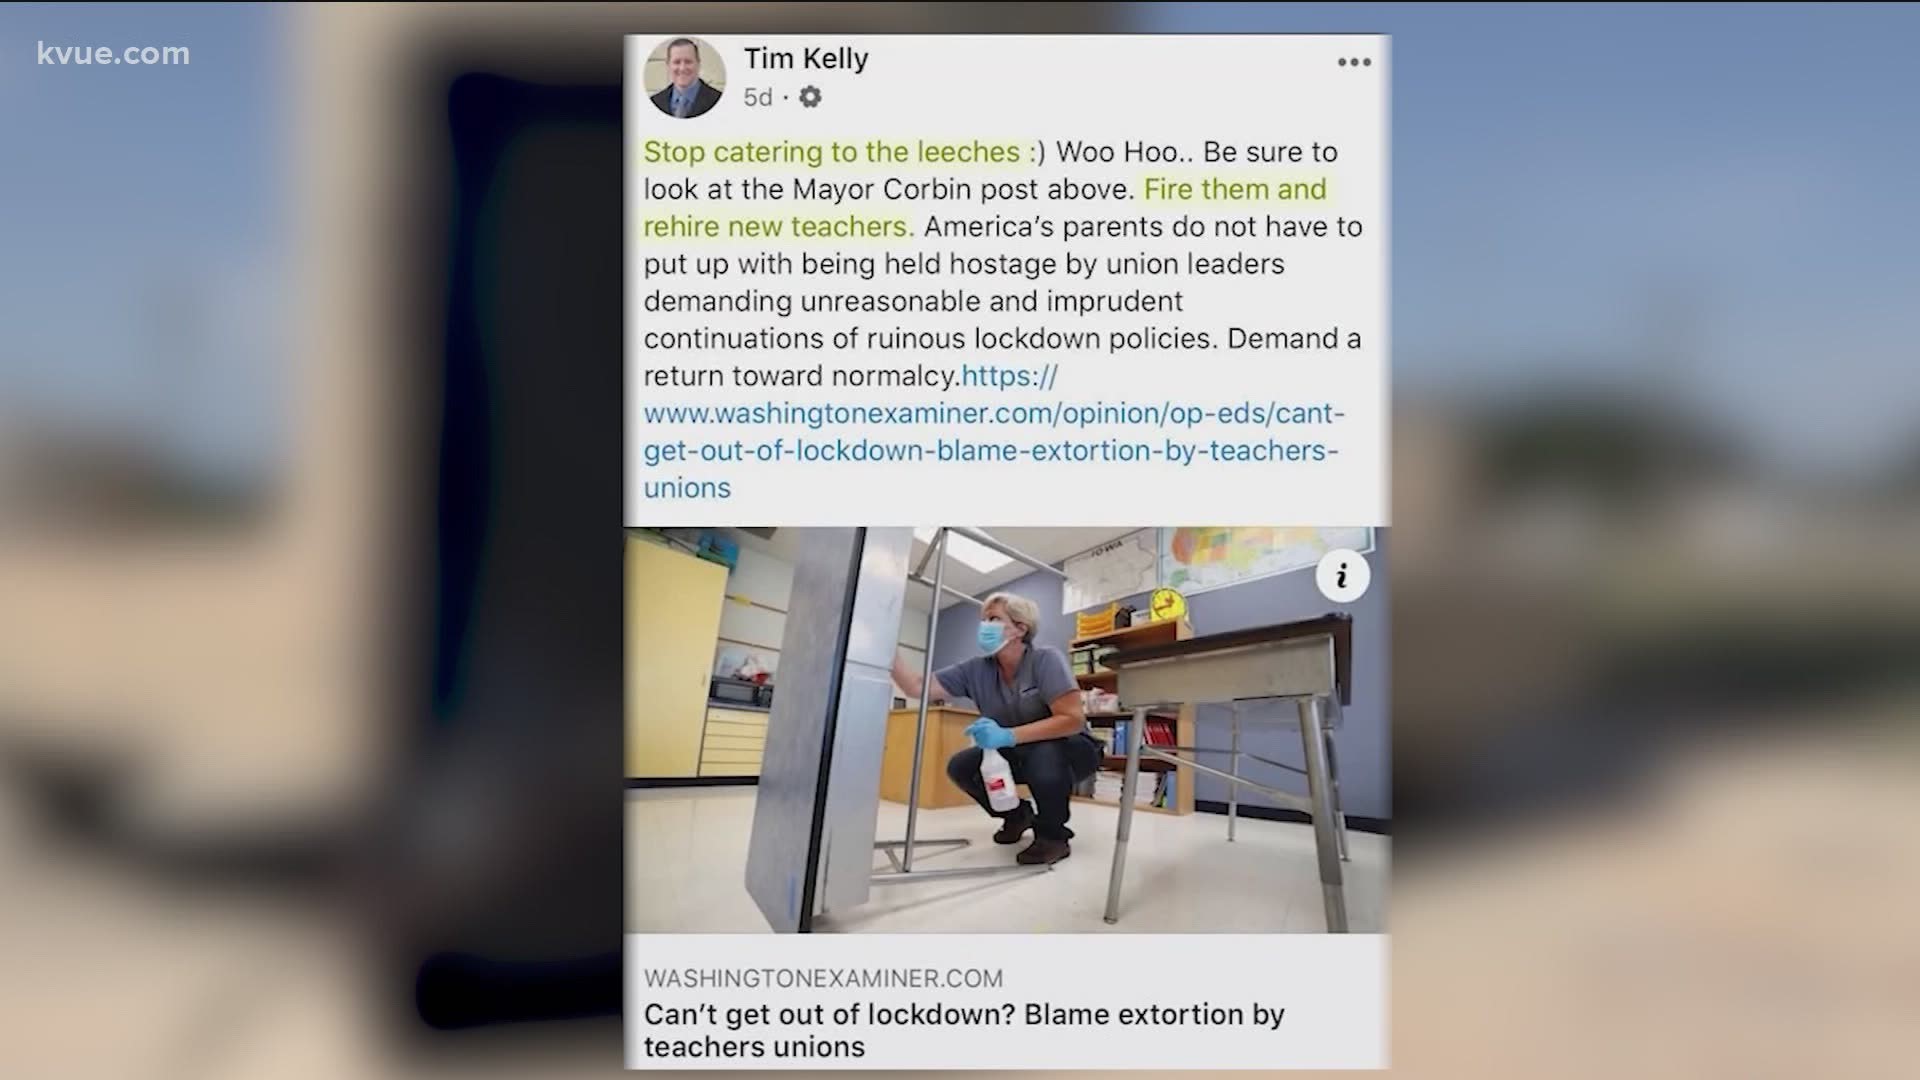 A Cedar Park city councilmember's job may be on the line. Tim Kelly called teachers "leeches" in a Facebook post and now some are trying to kick him out of office.